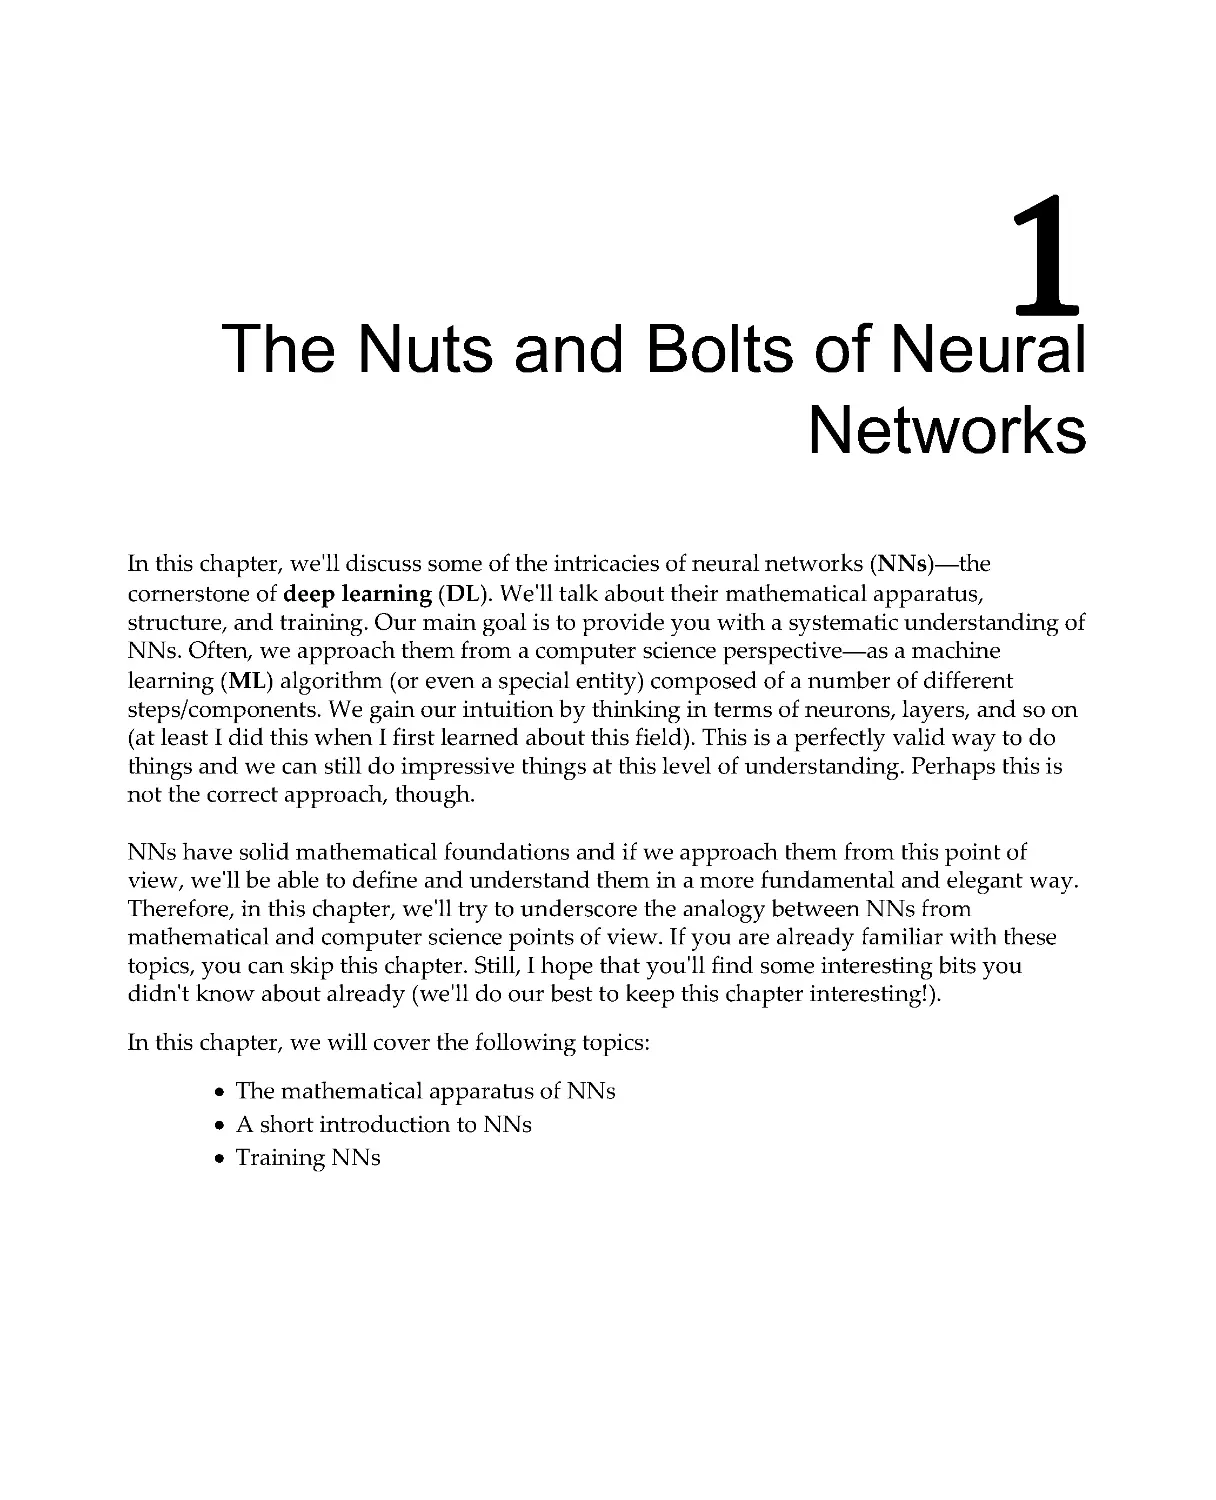 Chapter 1: The Nuts and Bolts of Neural Networks